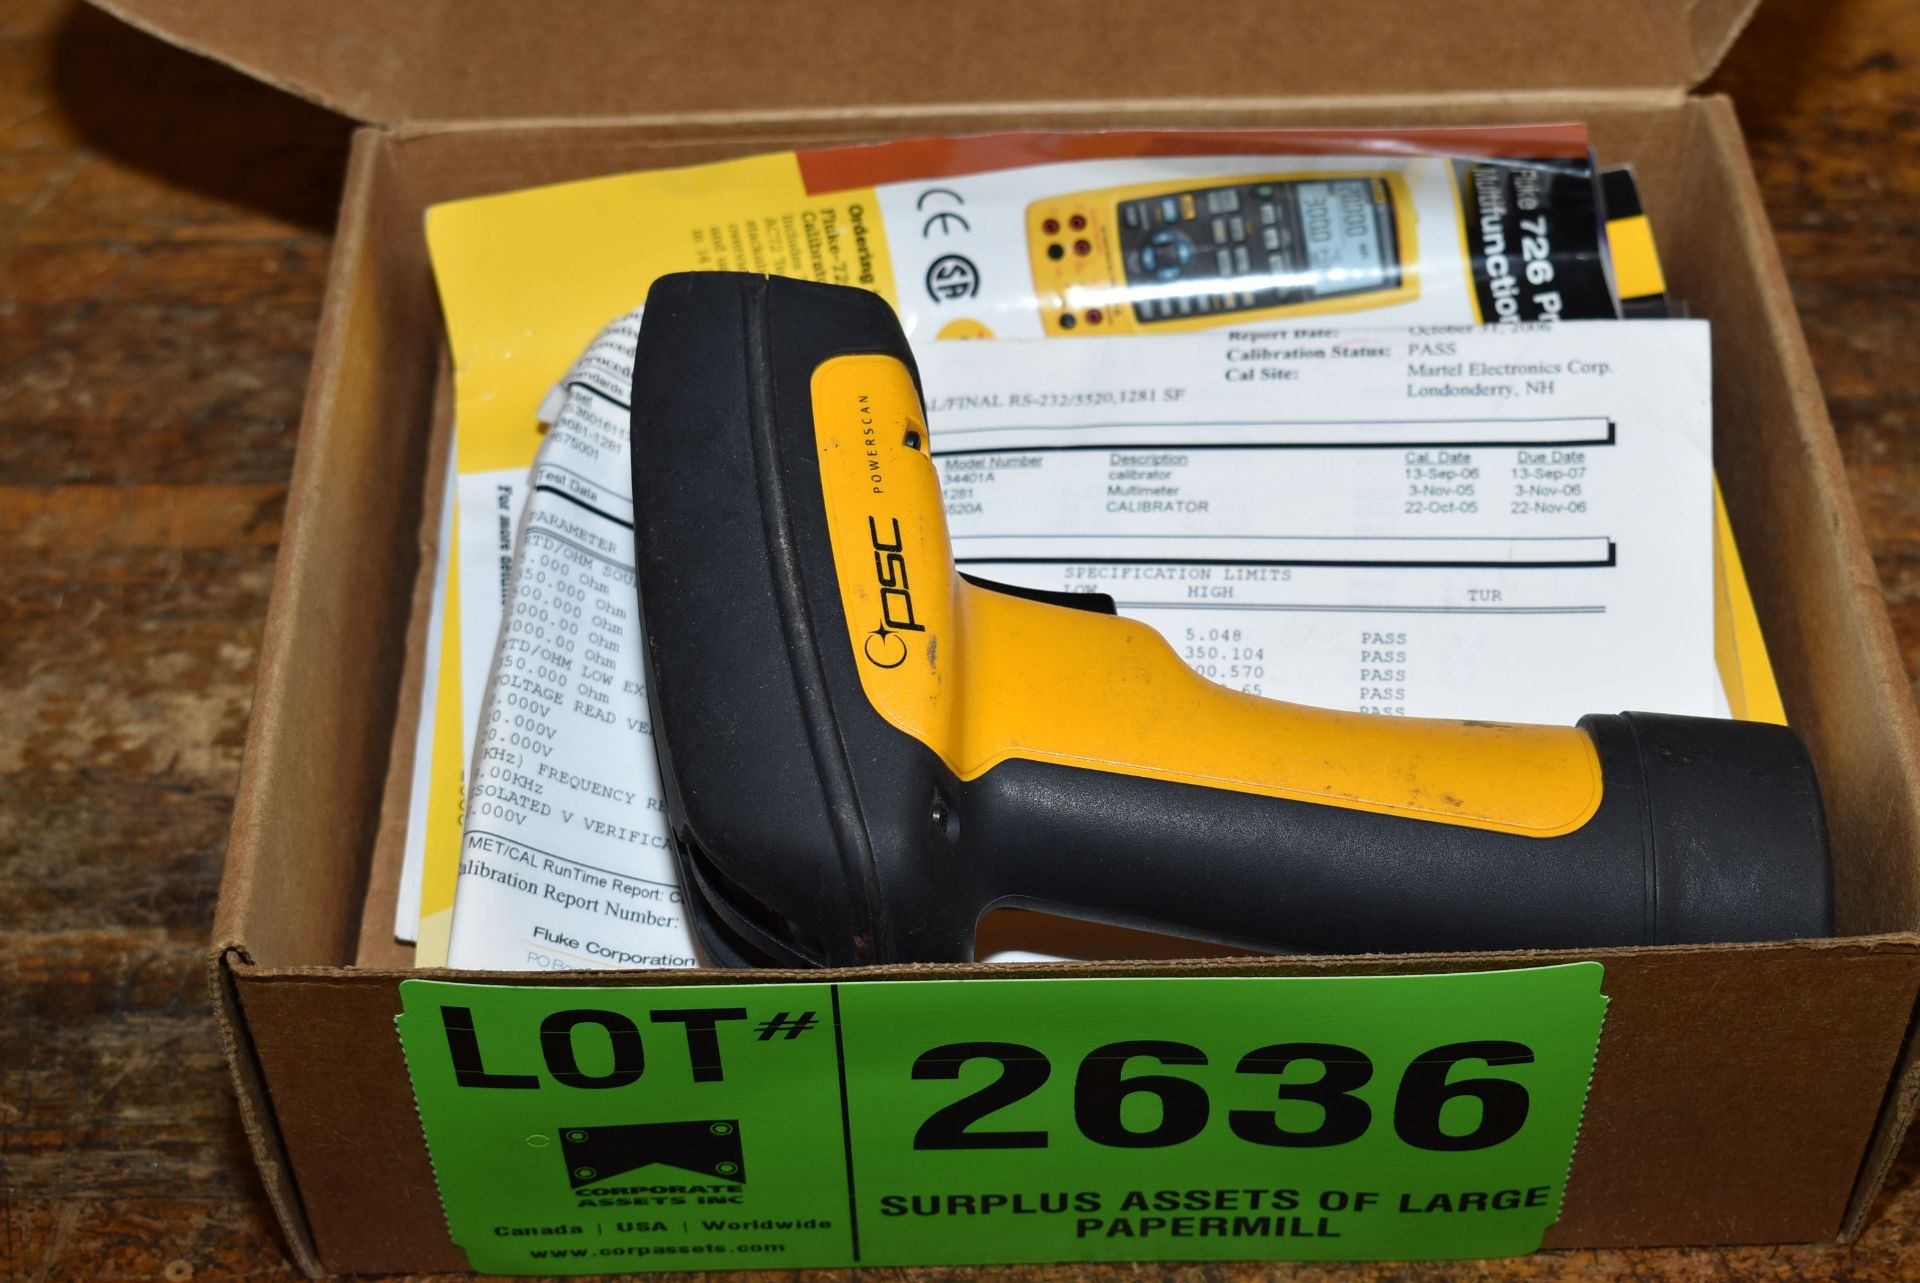 PSC POWERSCAN BAR CODE SCANNER [RIGGING FEE FOR LOT #2636 - $TBD USD PLUS APPLICABLE TAXES]